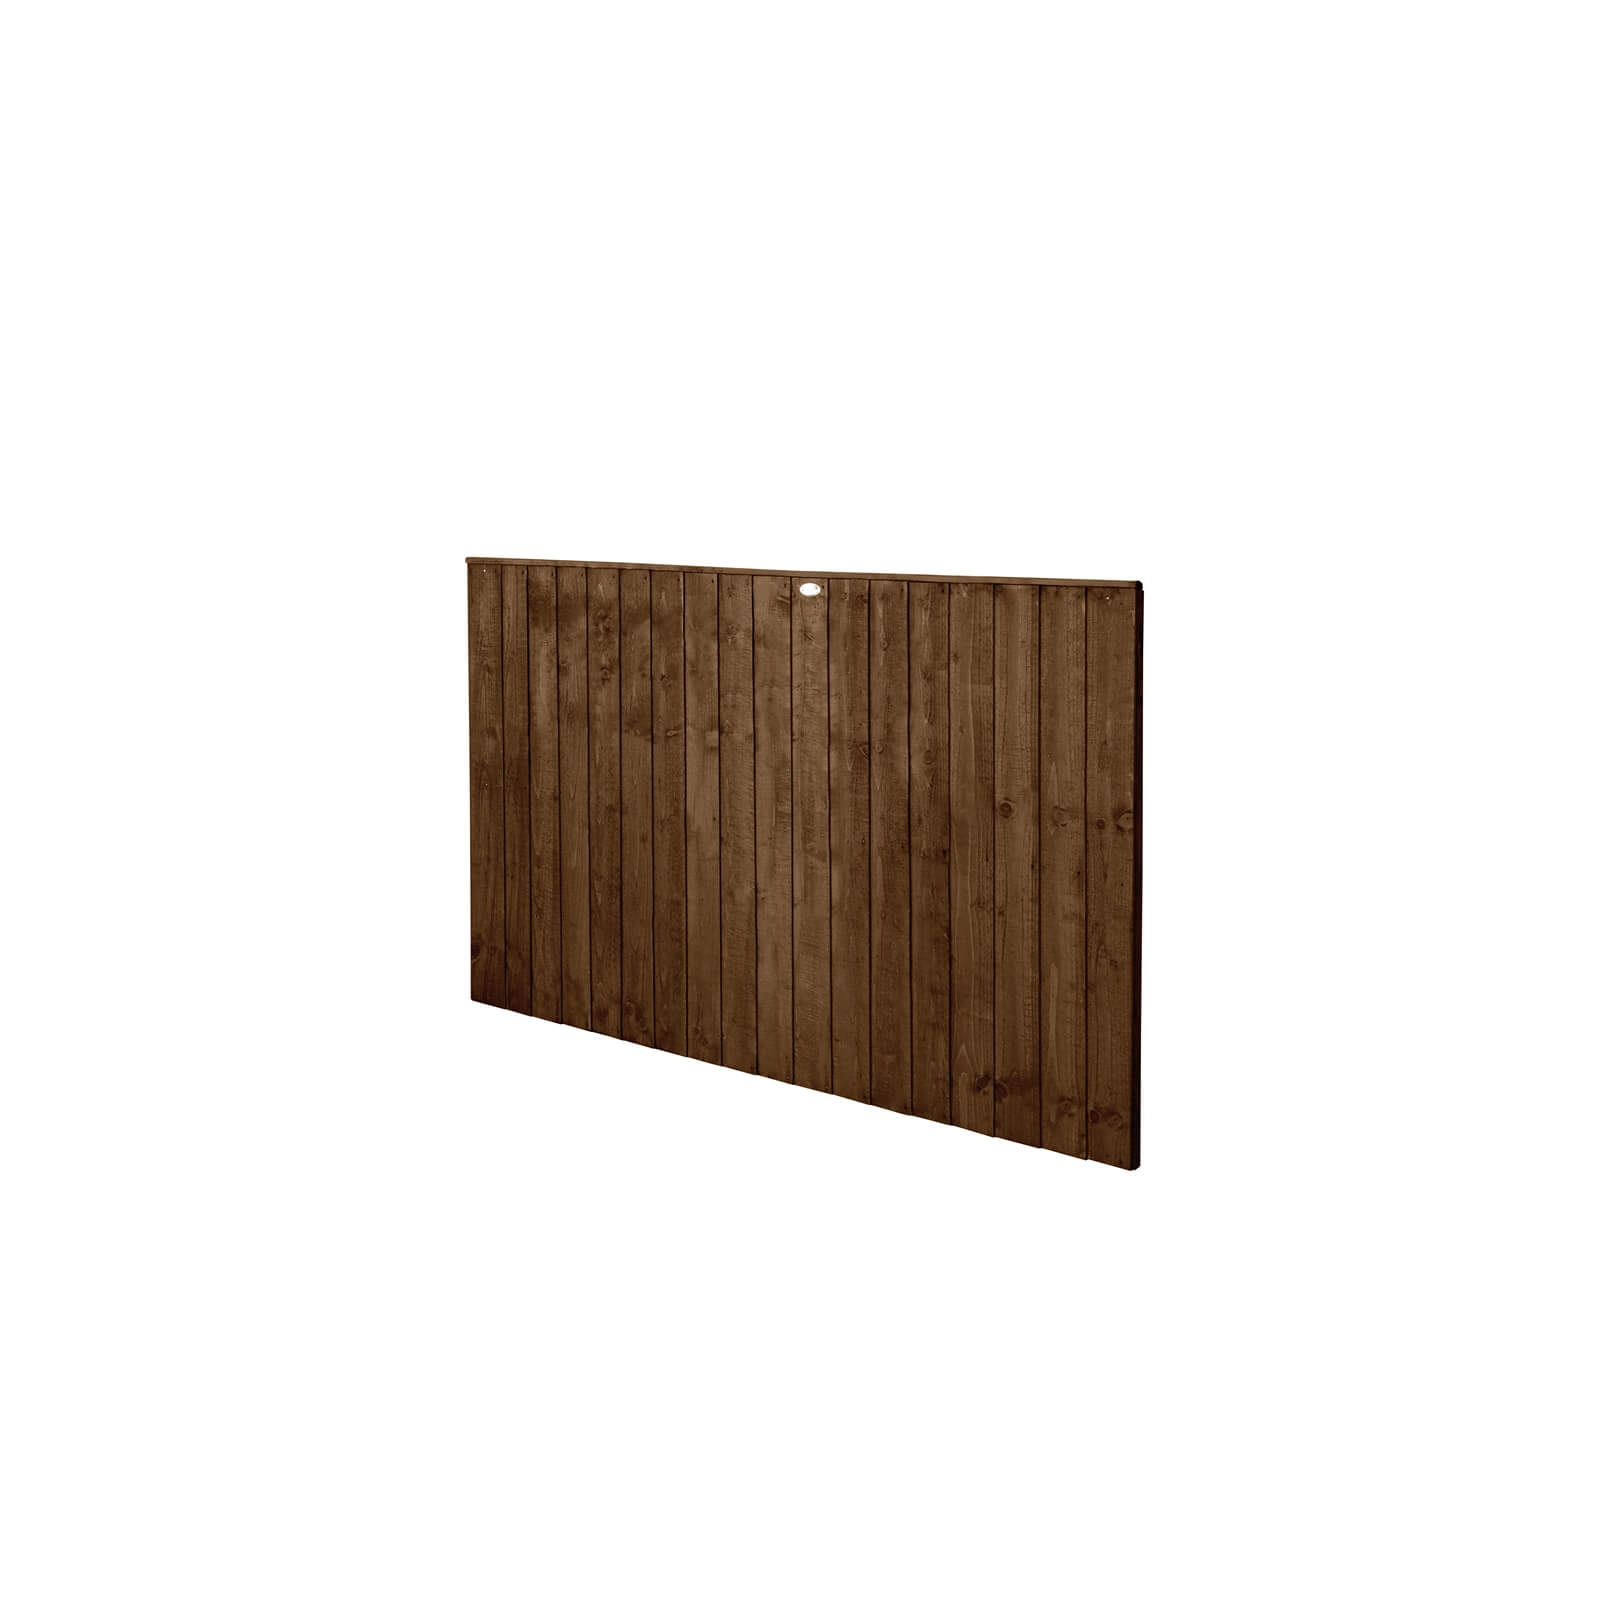 6ft x 4ft (1.83m x 1.23m) Pressure Treated Featheredge Fence Panel (Dark Brown) - Pack of 3